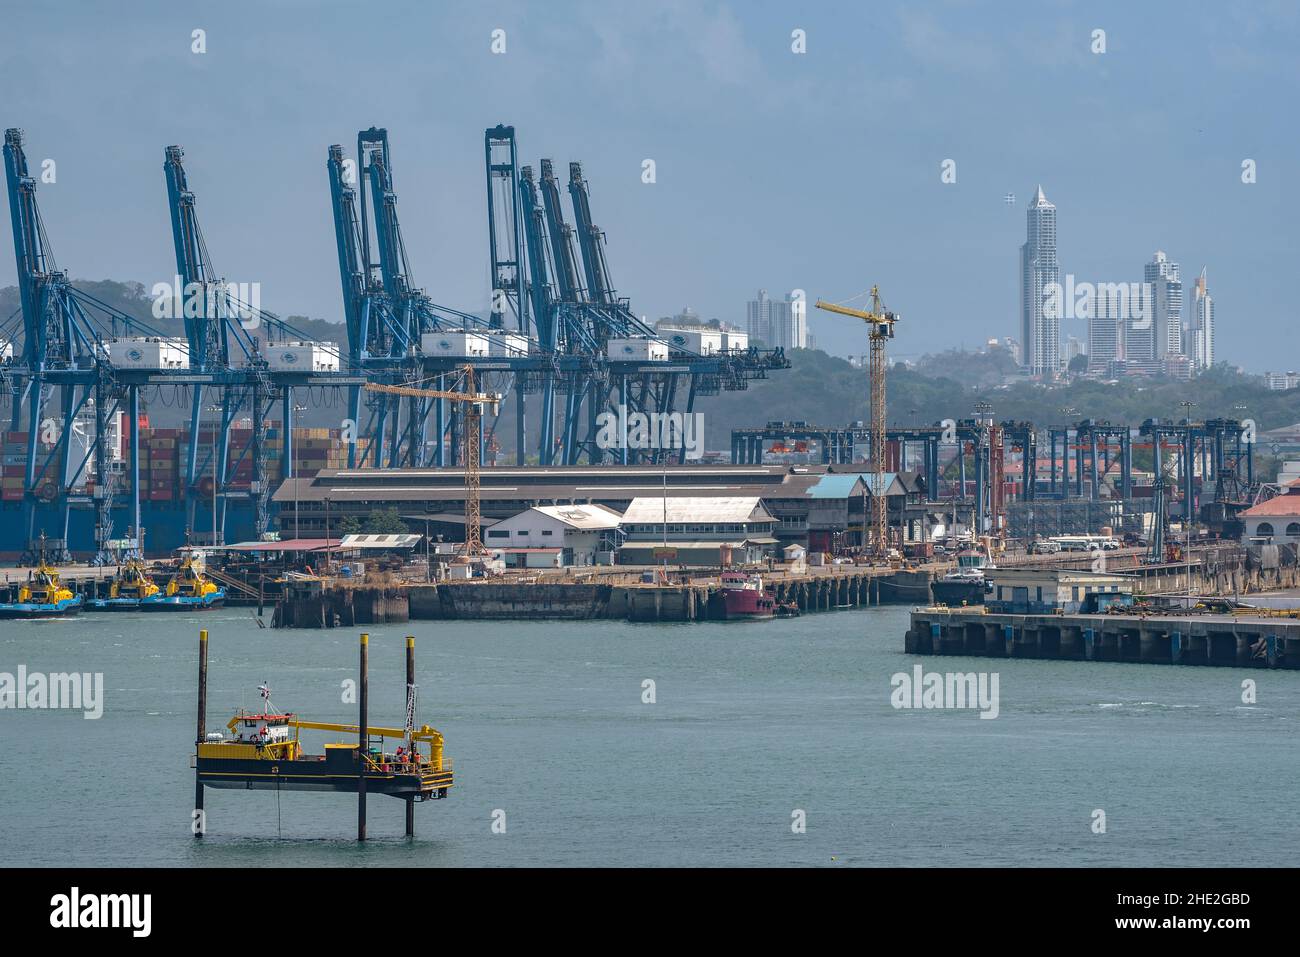 Entrance to the Panama Canal and container loading area in the port of Balboa Stock Photo